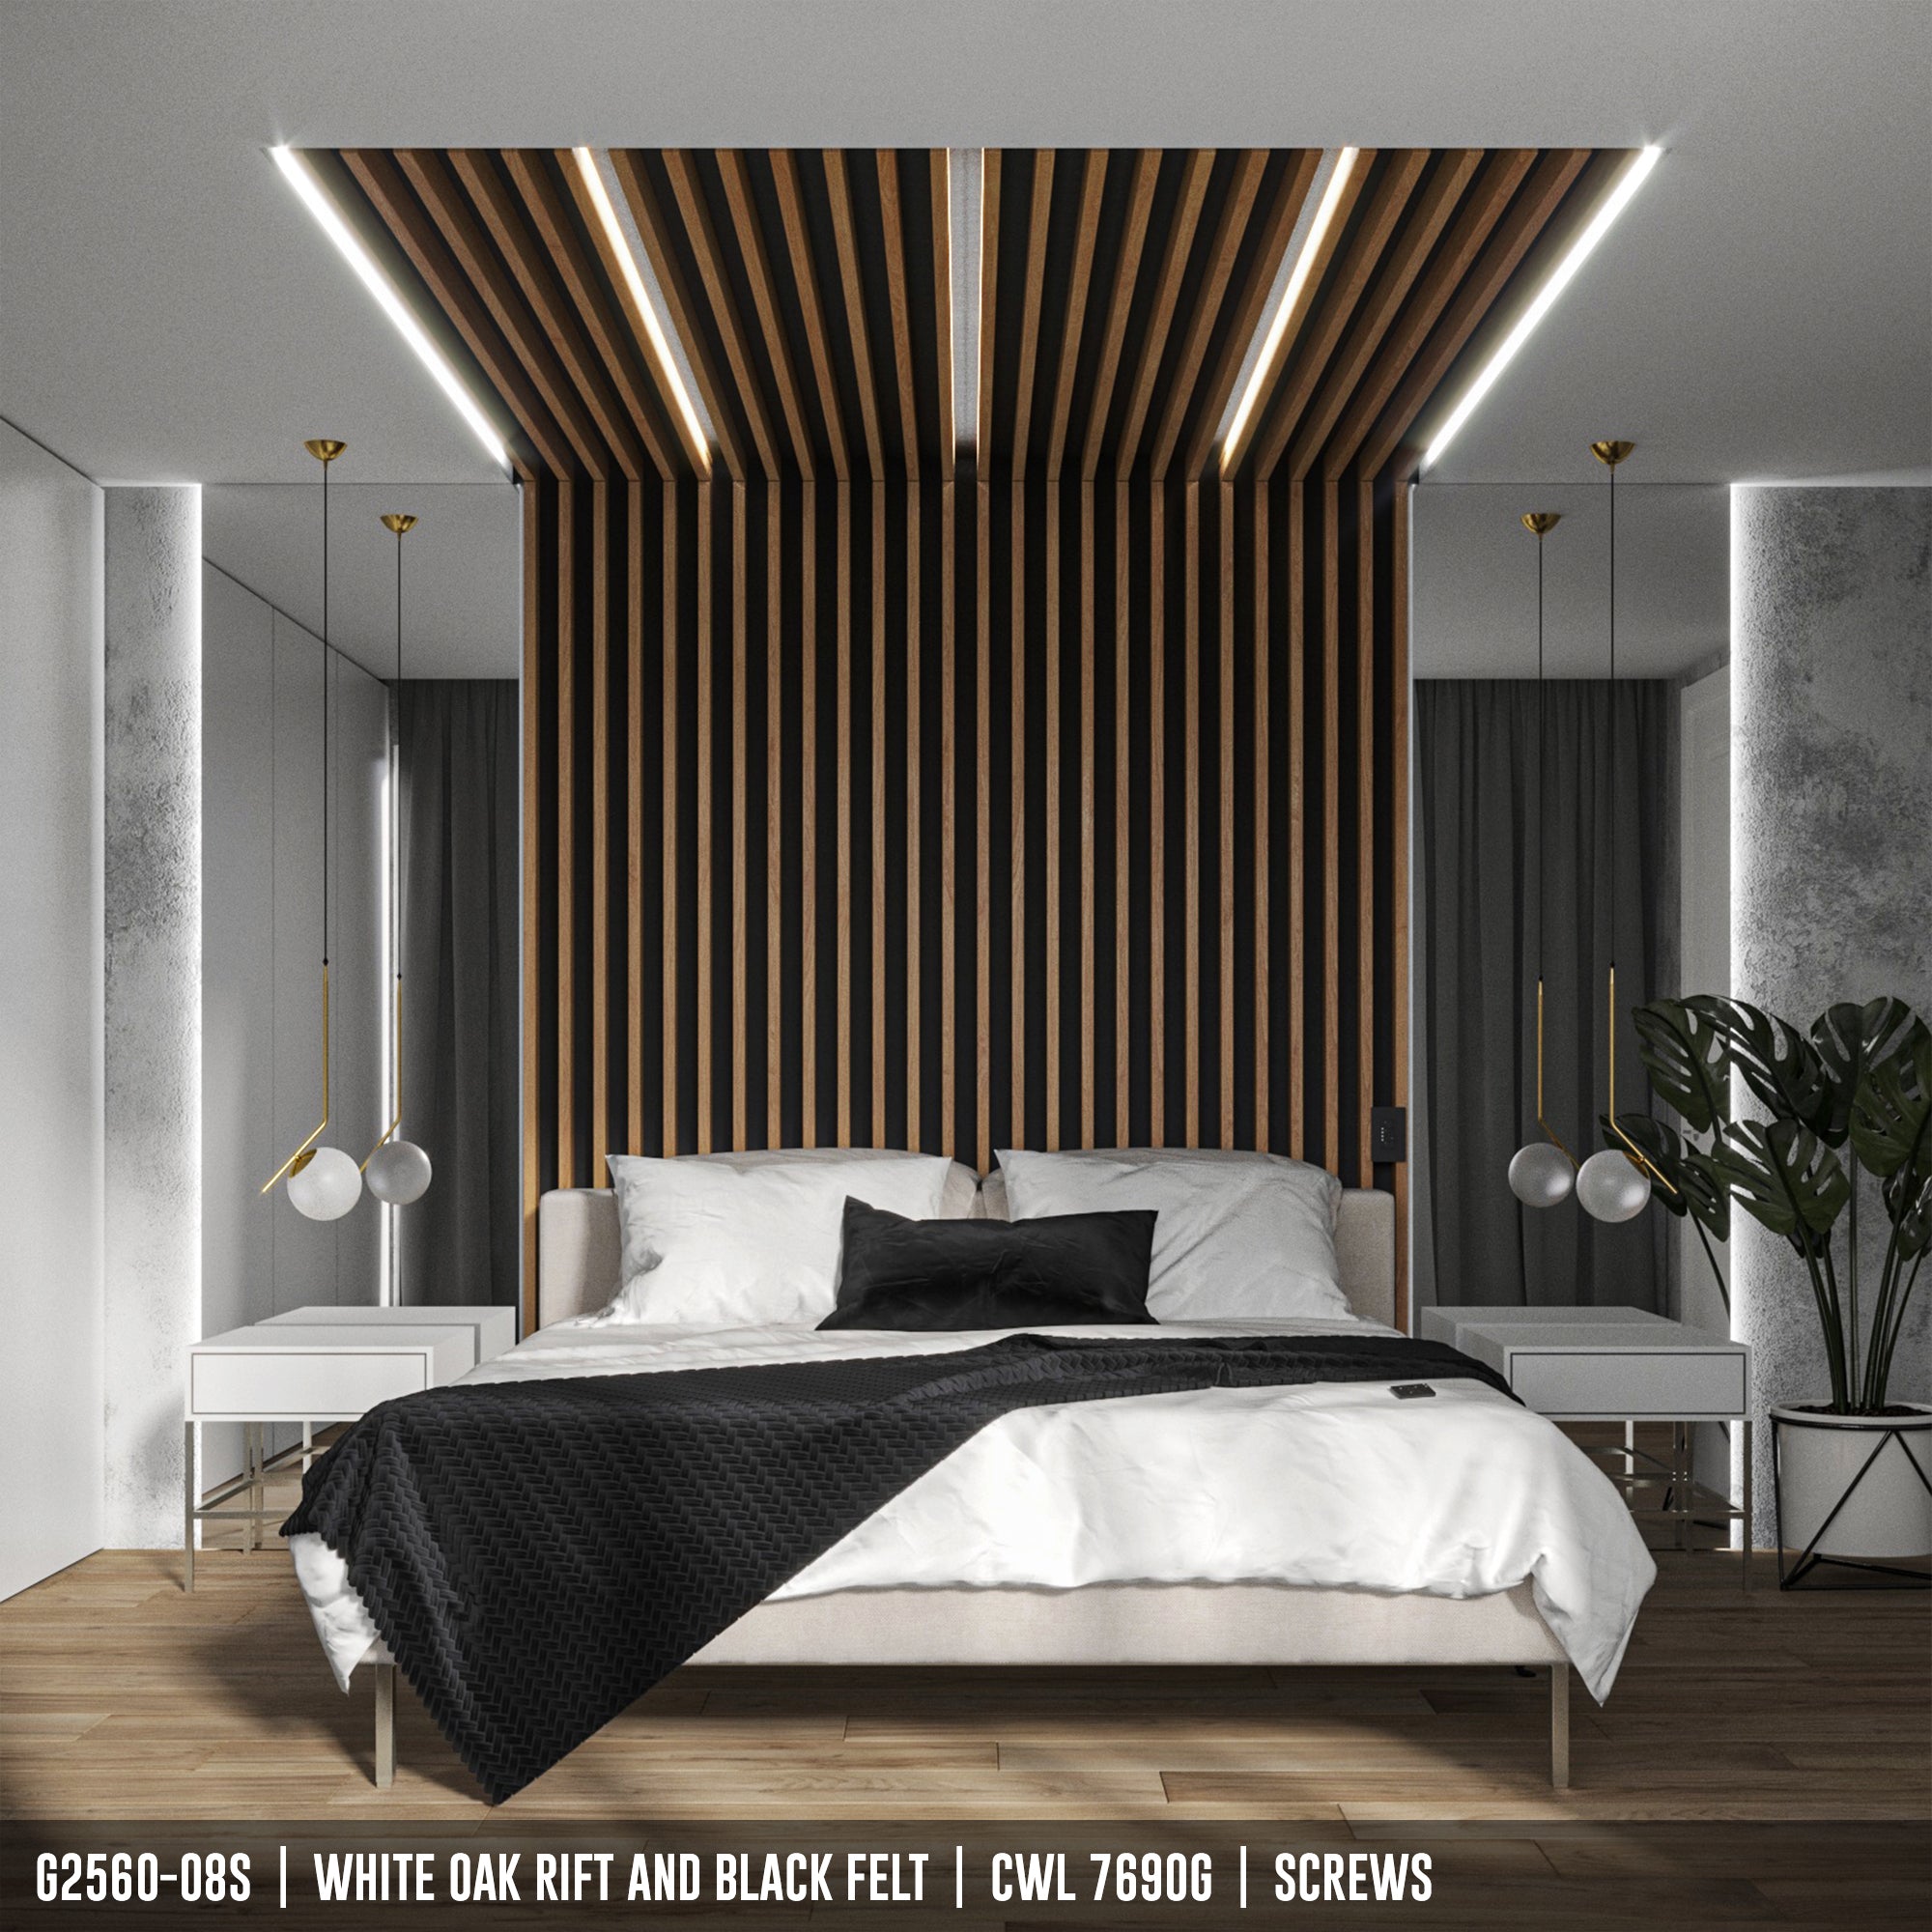 G2560-08S | Acoustical Linear Wood Panel